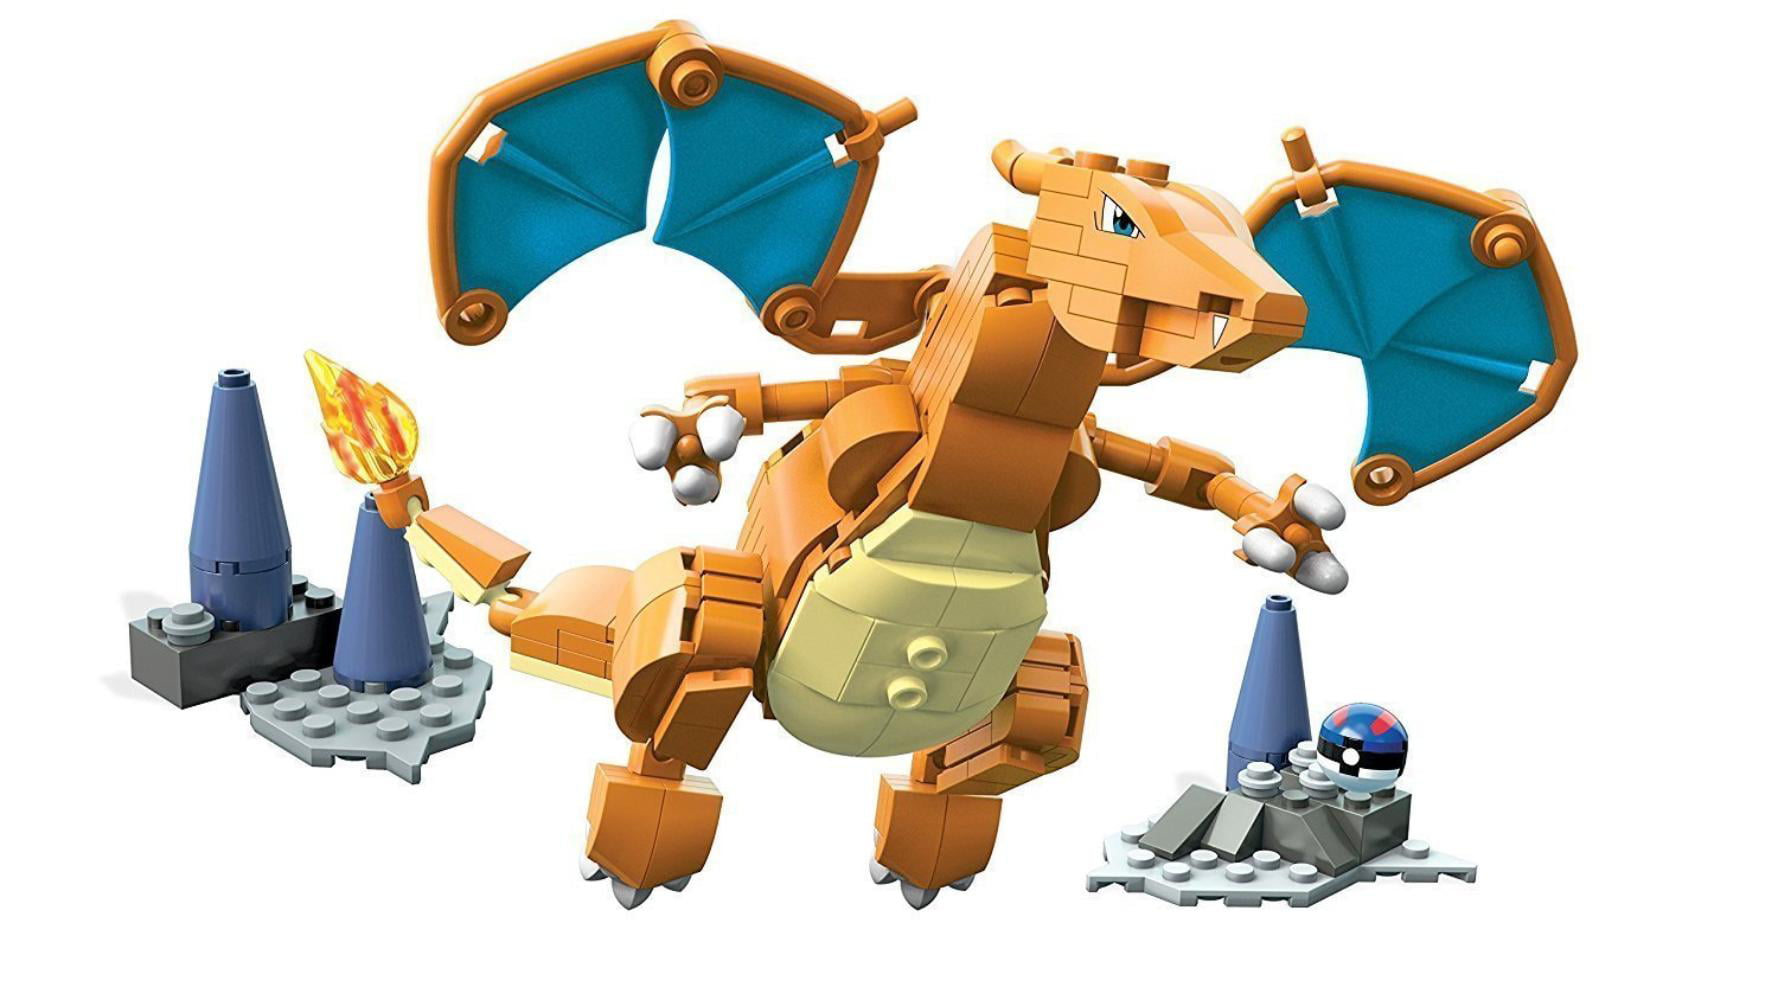 Pokemon Charizard Building Set, Ages 8 and up By Mega Construx